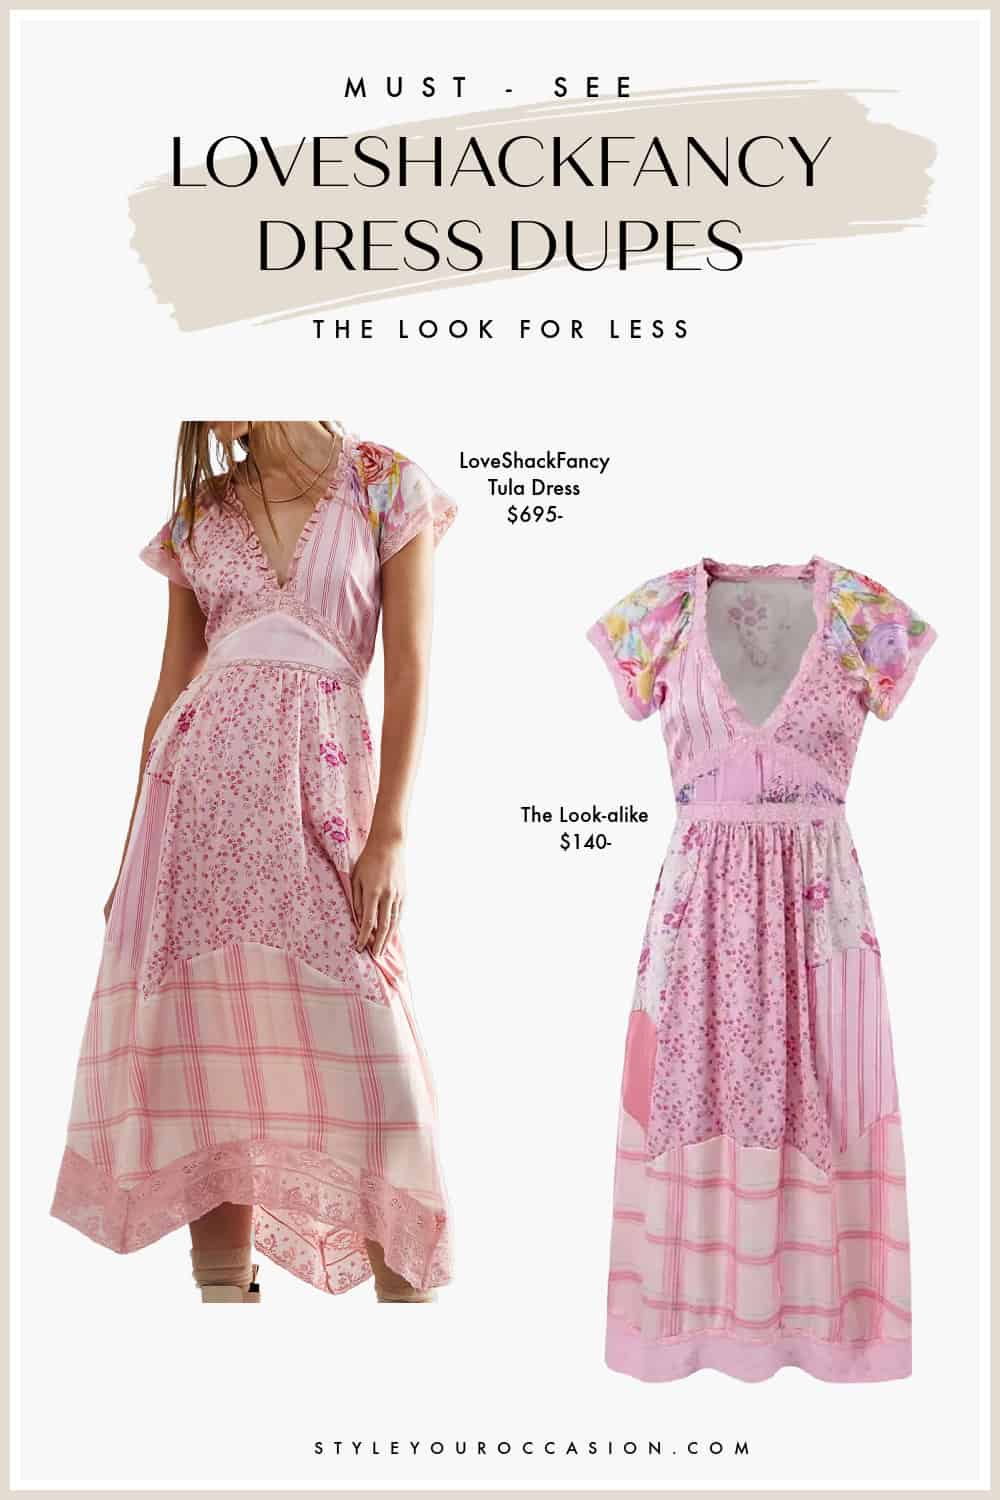 image comparing two pink floral patchwork midi dresses, one from LoveShackFancy, the other a dupe from Etsy